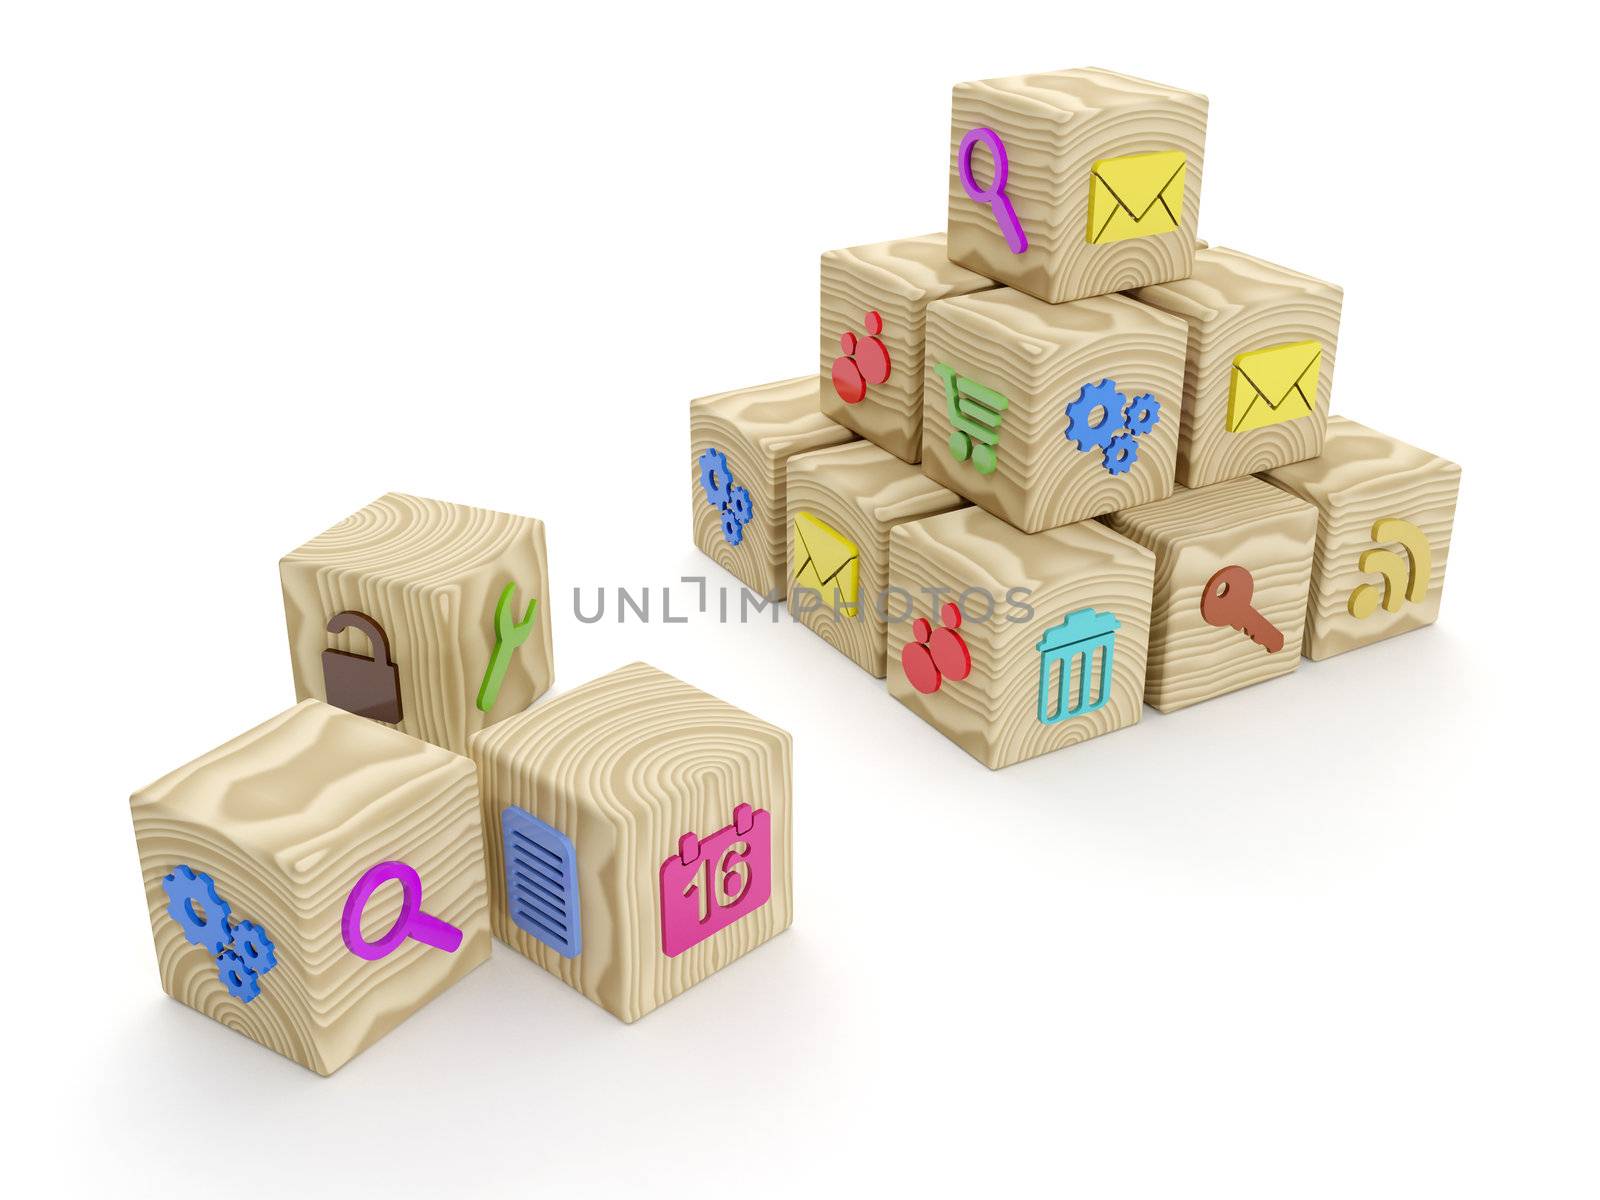 3d illustration: A group of wooden blocks, the mobile will